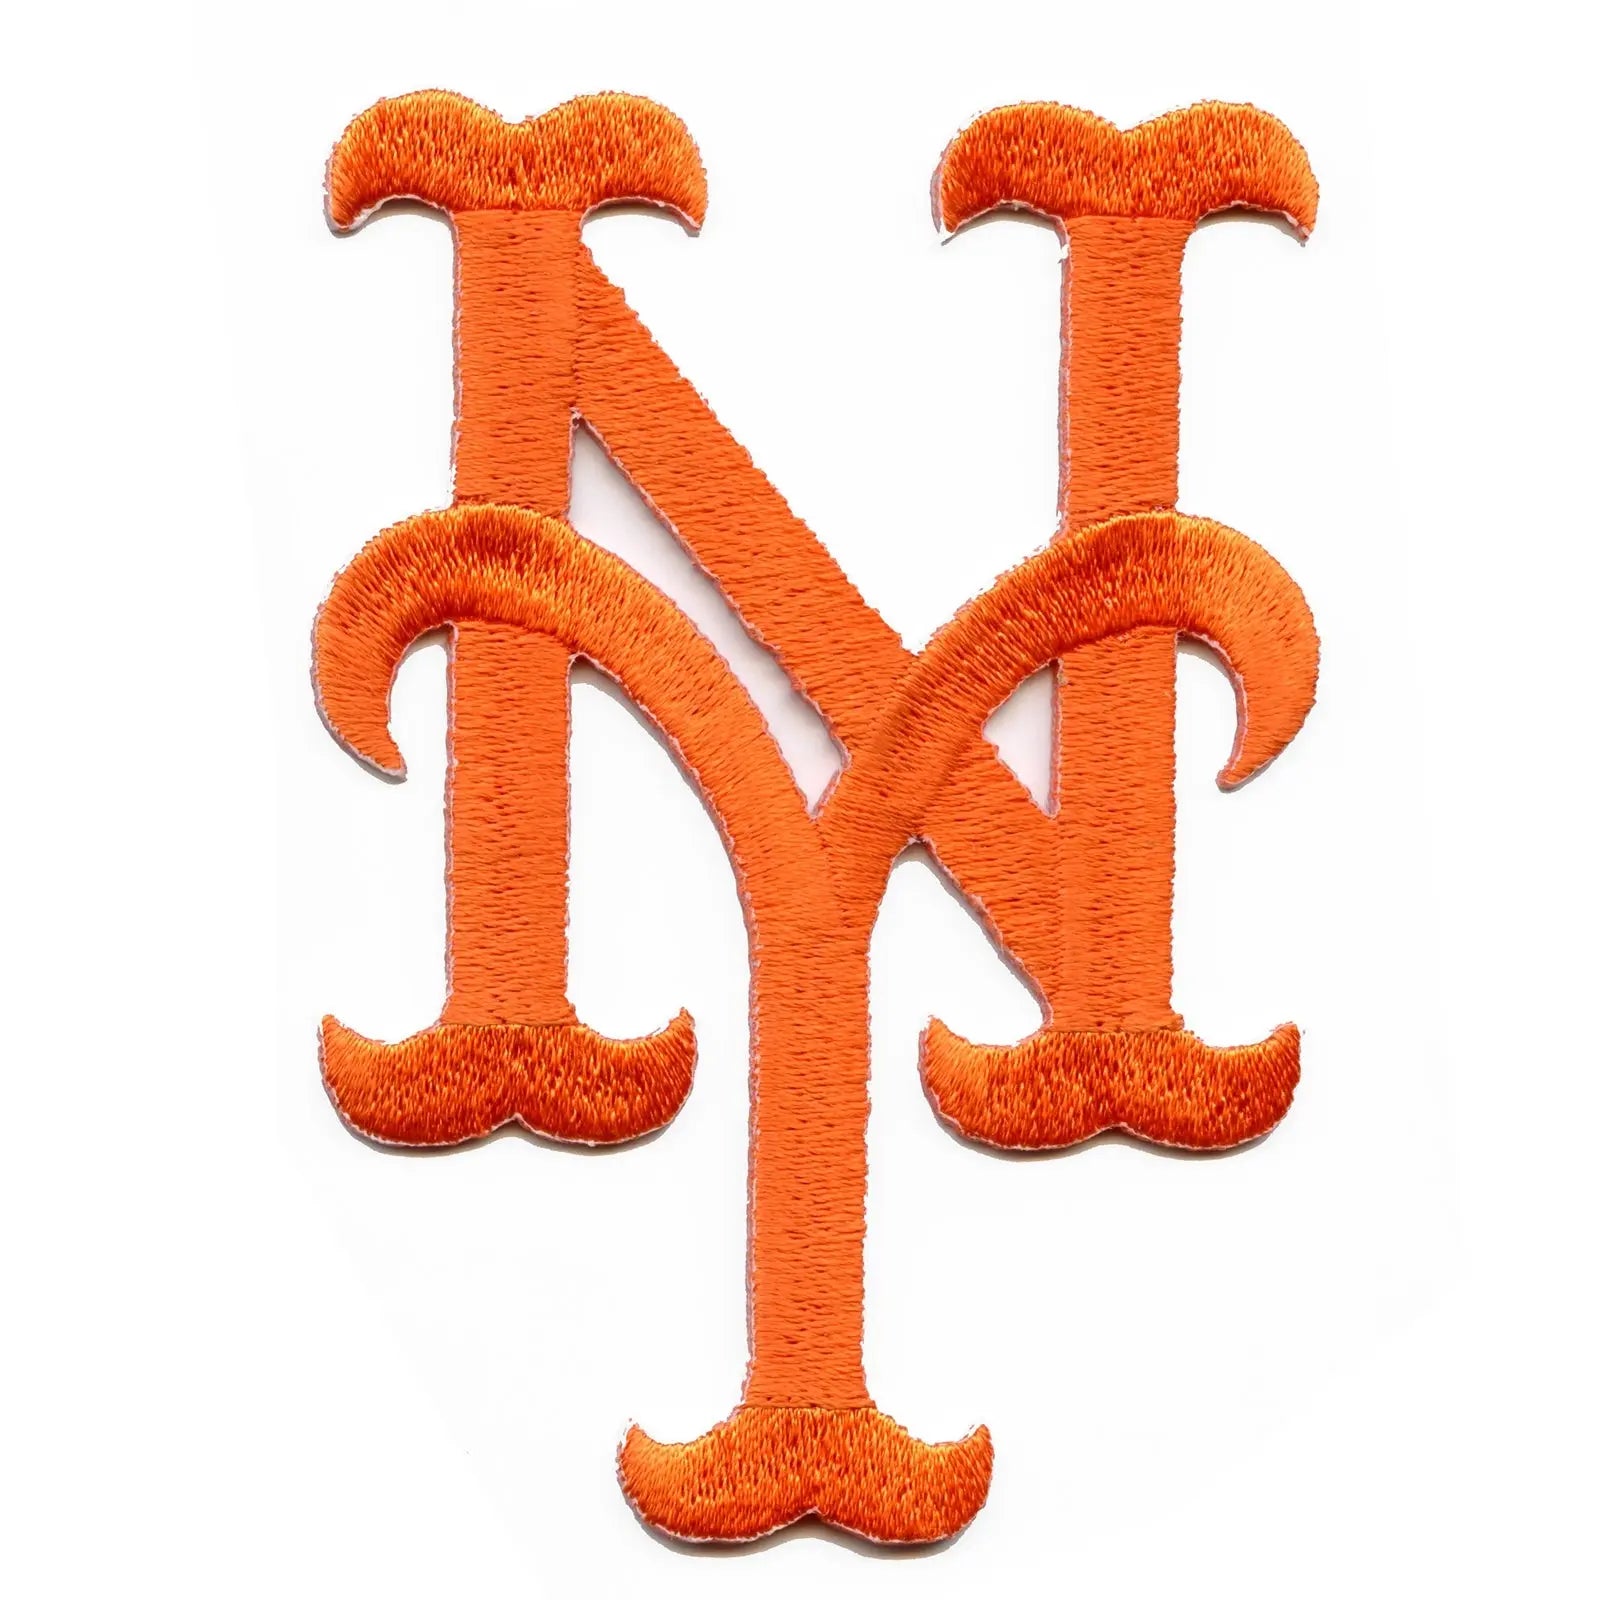 New York Mets Embroidered Emblem Patch – 4”